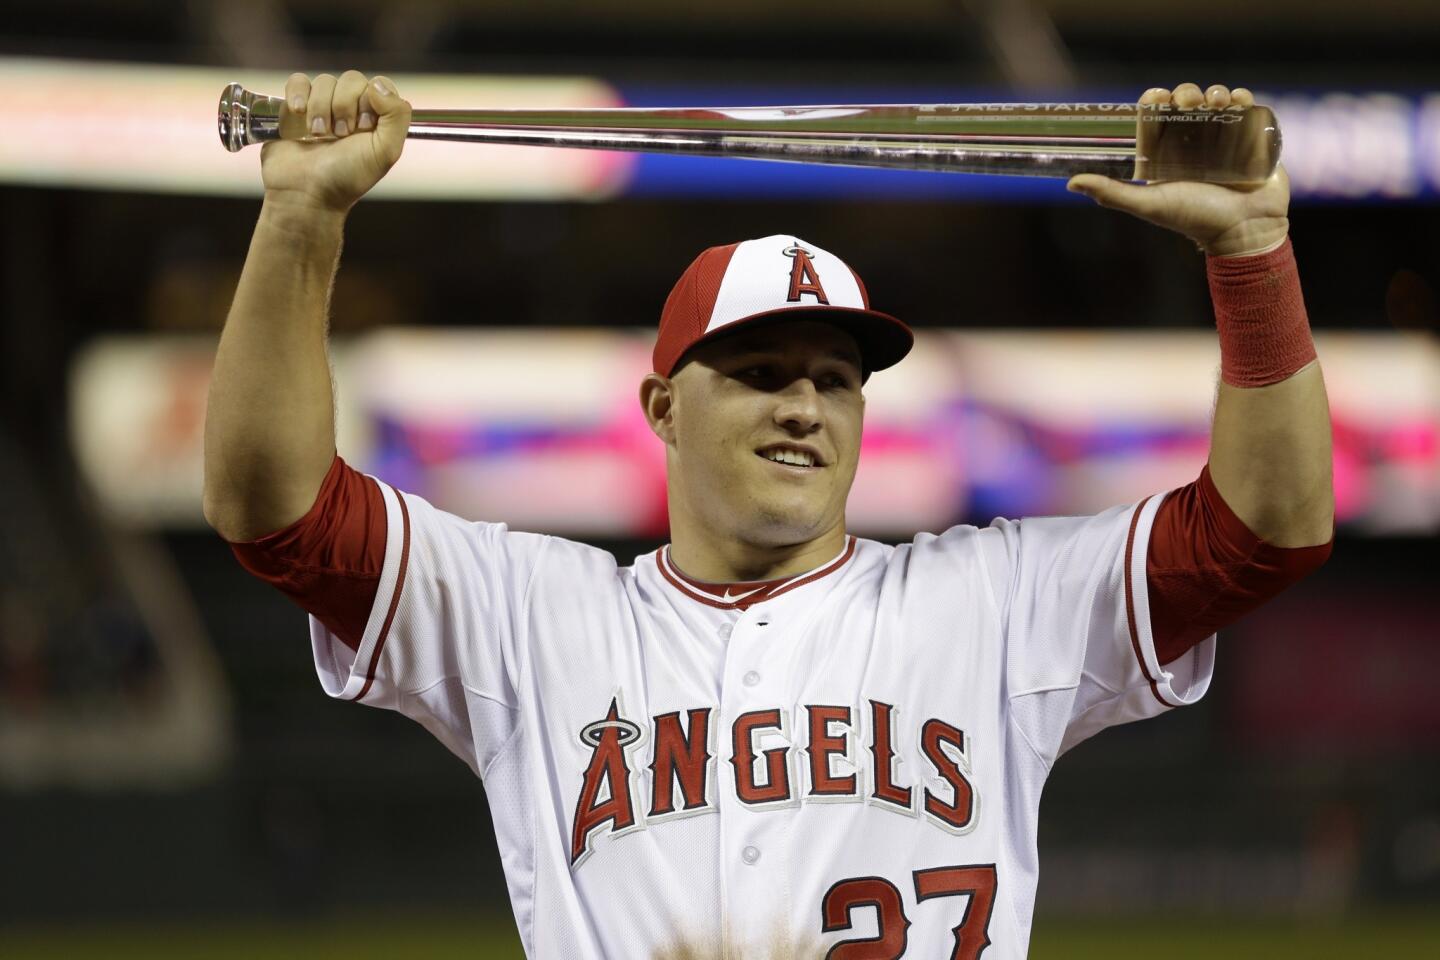 Angels center fielder Mike Trout holds the All-Star Game MVP award following the American League's 5-3 victory over the National League at Target Field in Minneapolis on Tuesday.